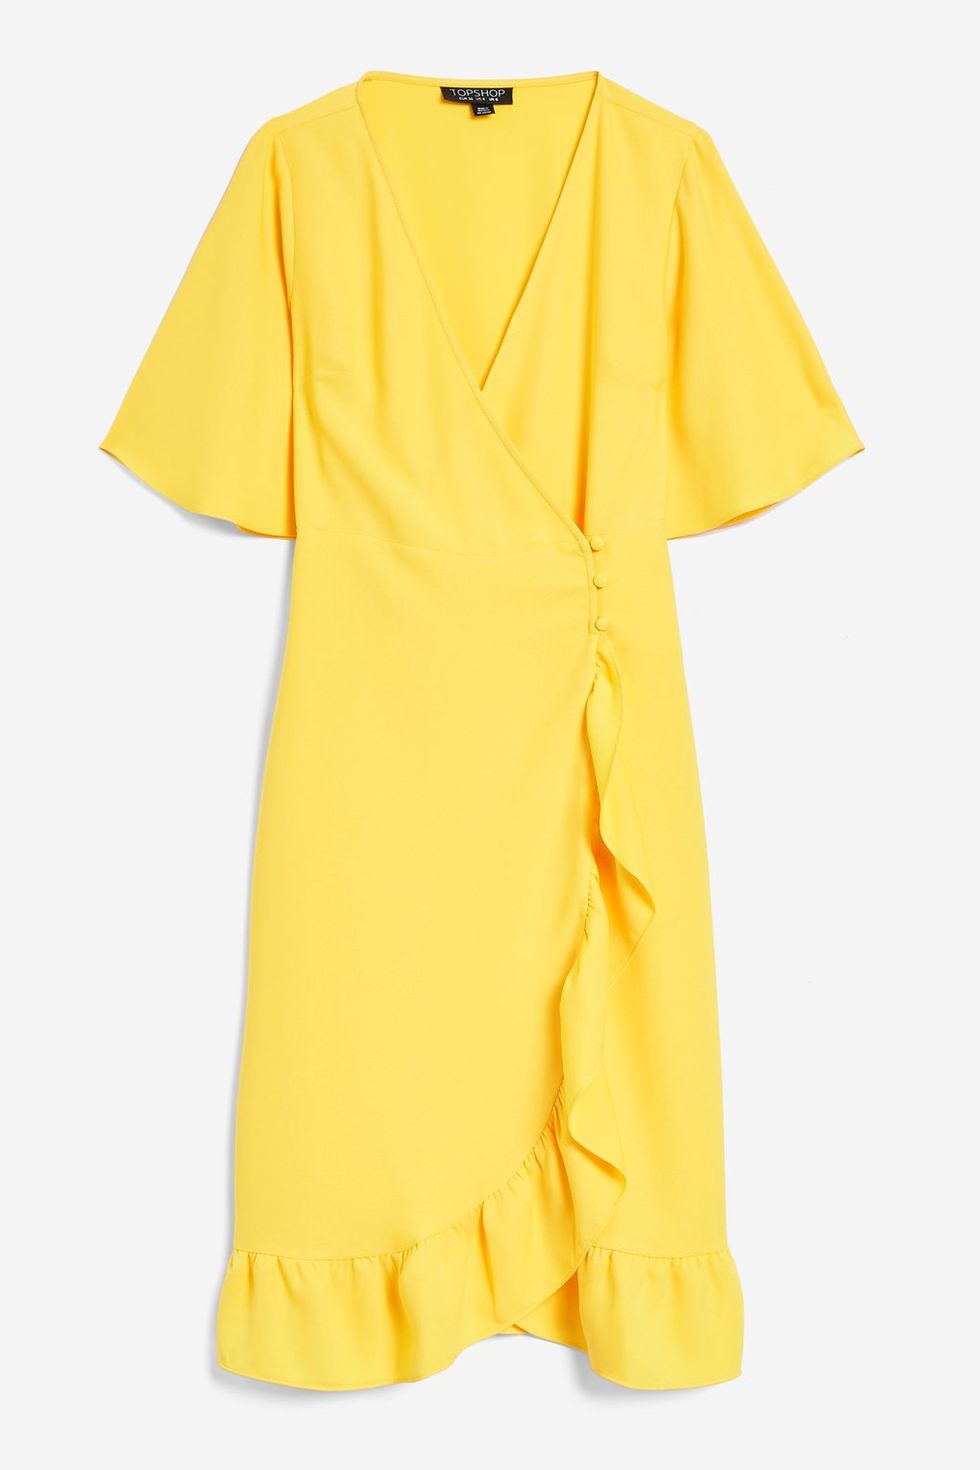 Clothing, Yellow, Day dress, Dress, Sleeve, Neck, Cover-up, 